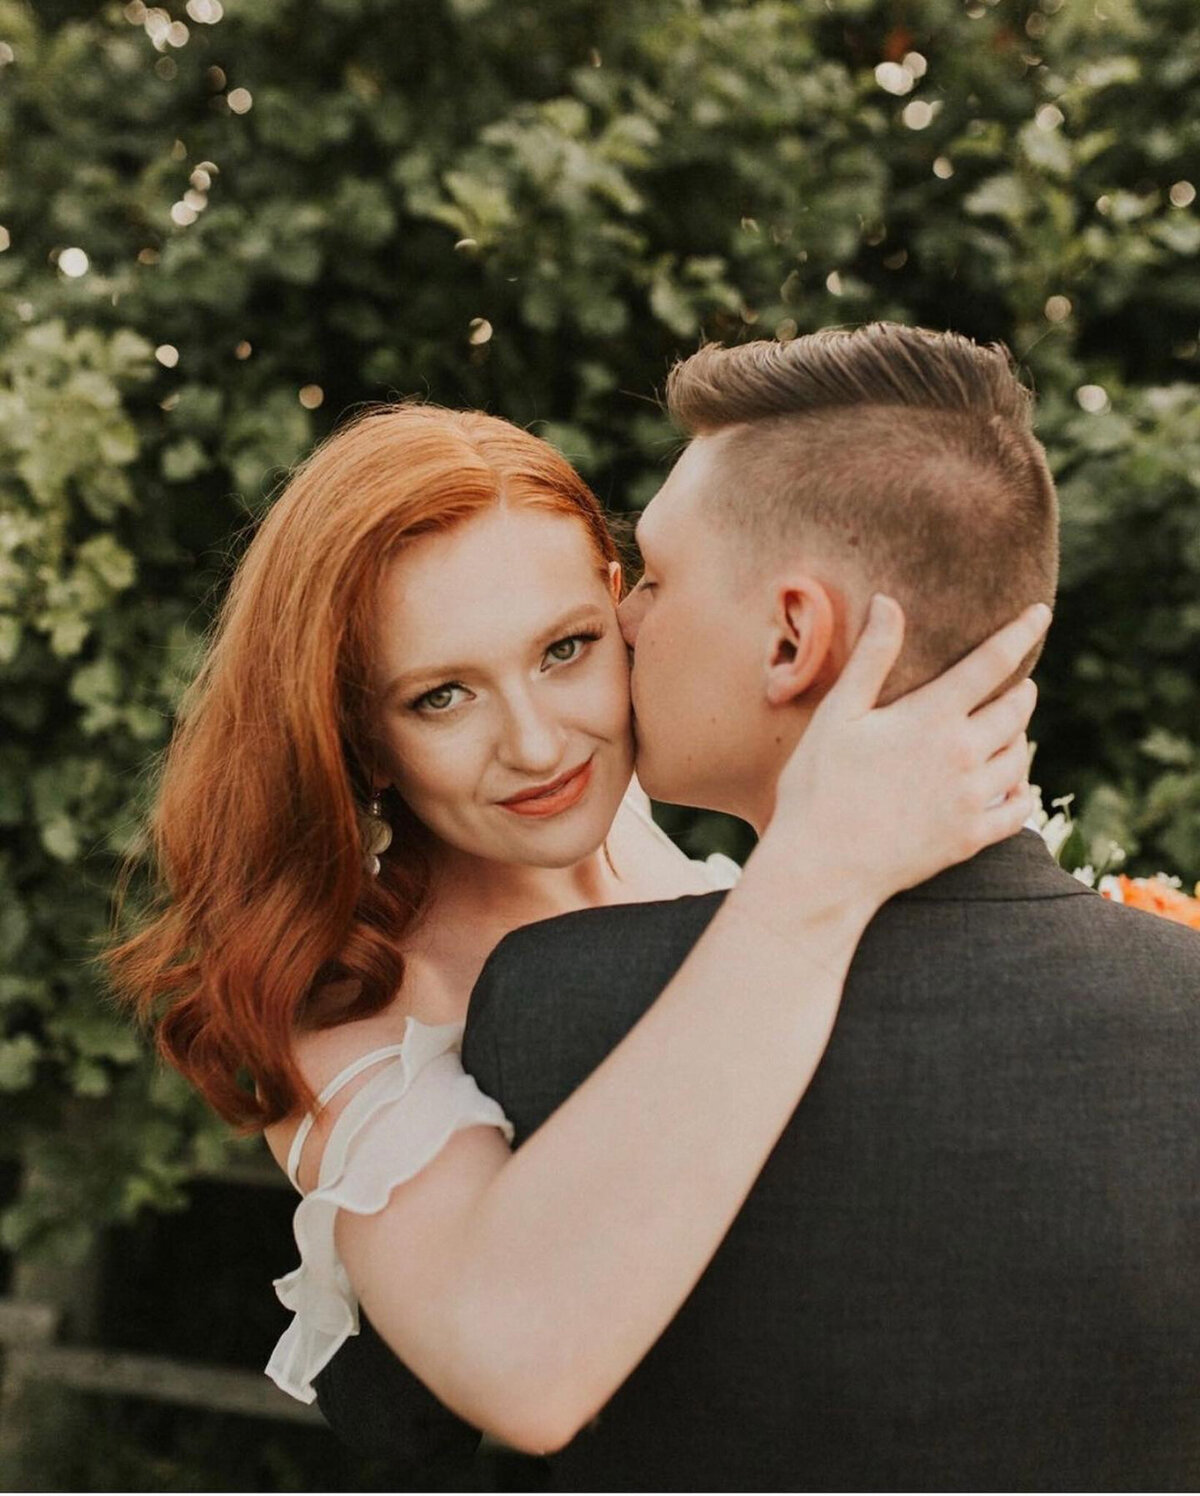 Gorgeous bridal hair and makeup by Madi Leigh Artistry, experienced and inclusive Calgary hair & makeup artist, featured on the Brontë Bride Vendor Guide.